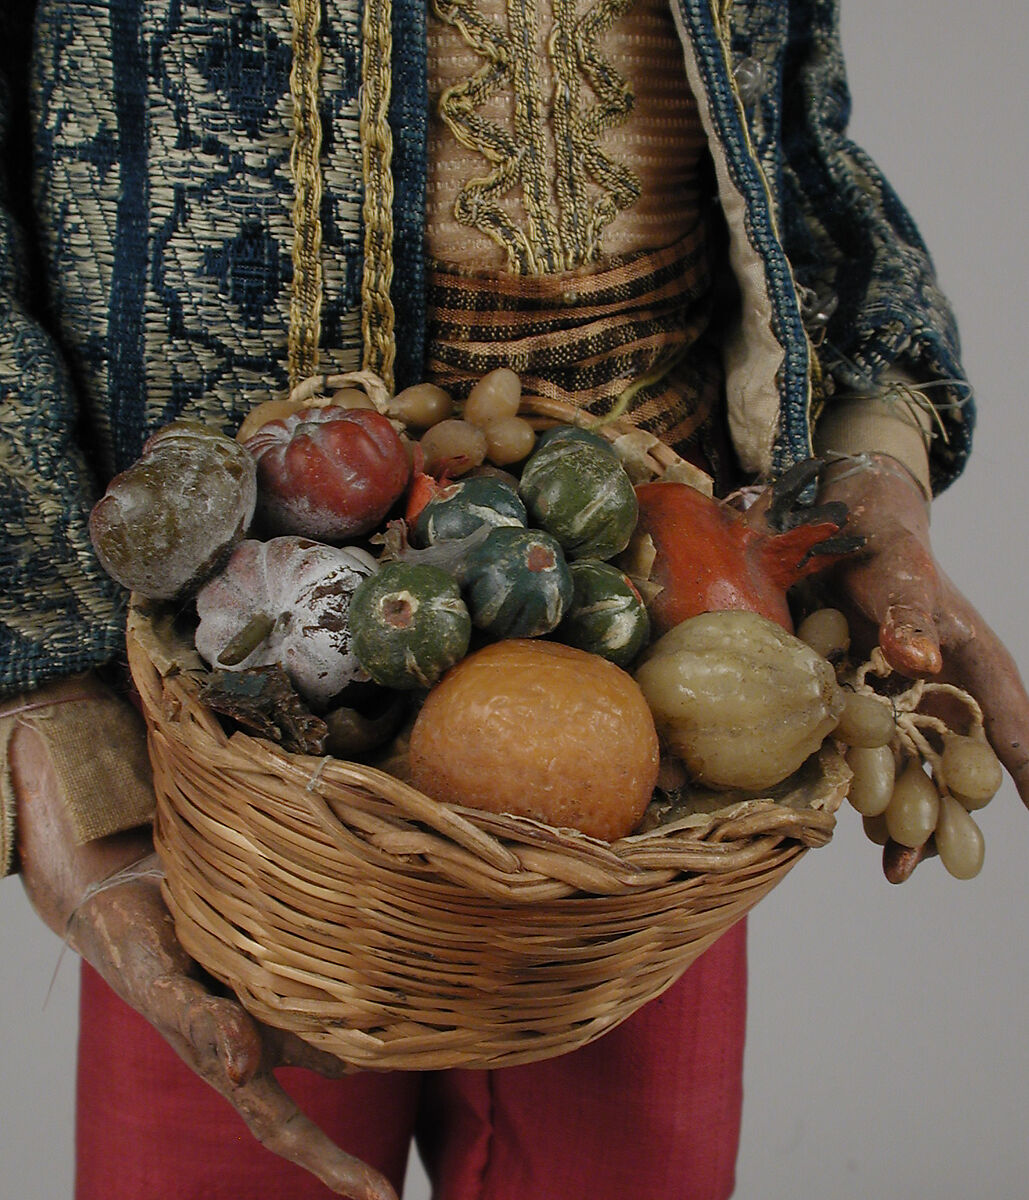 Basket of fruit and vegetables, Wax and wicker, Italian, Naples